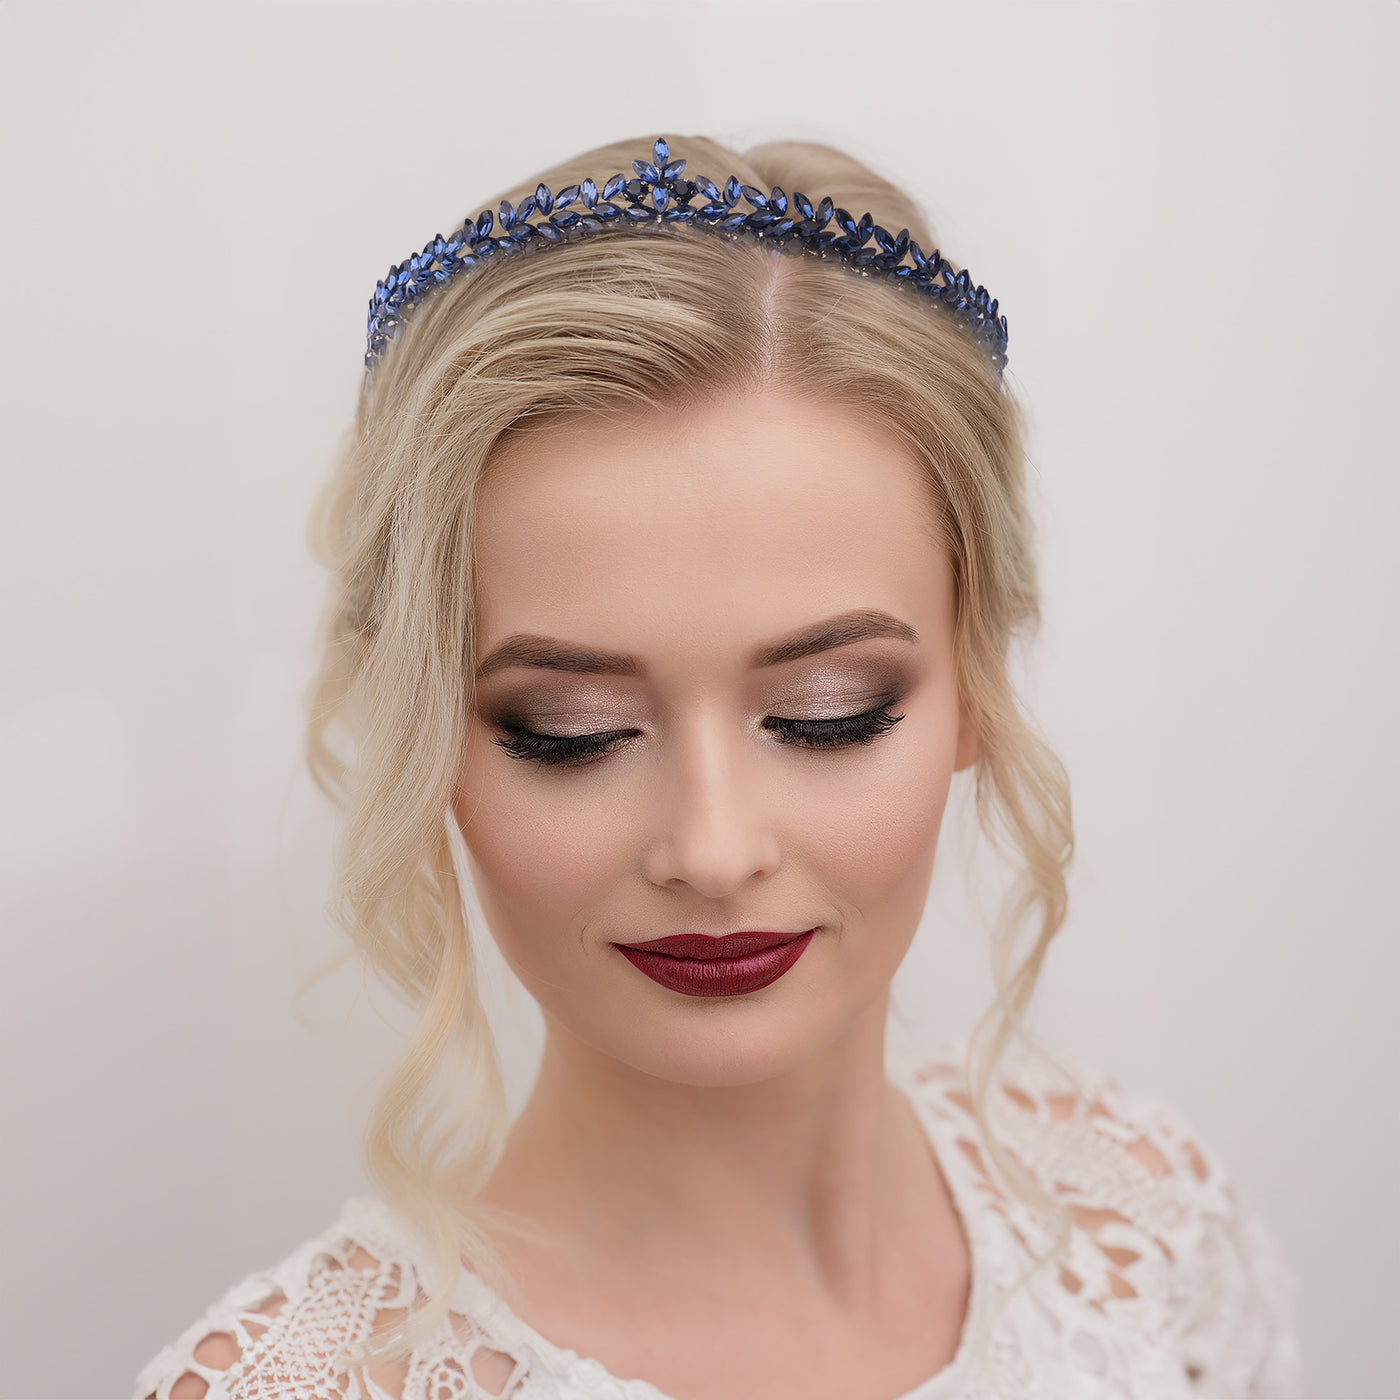 Bridal Henna Night Crown with Crystal Stones for Prom Bridal Princess Crown.